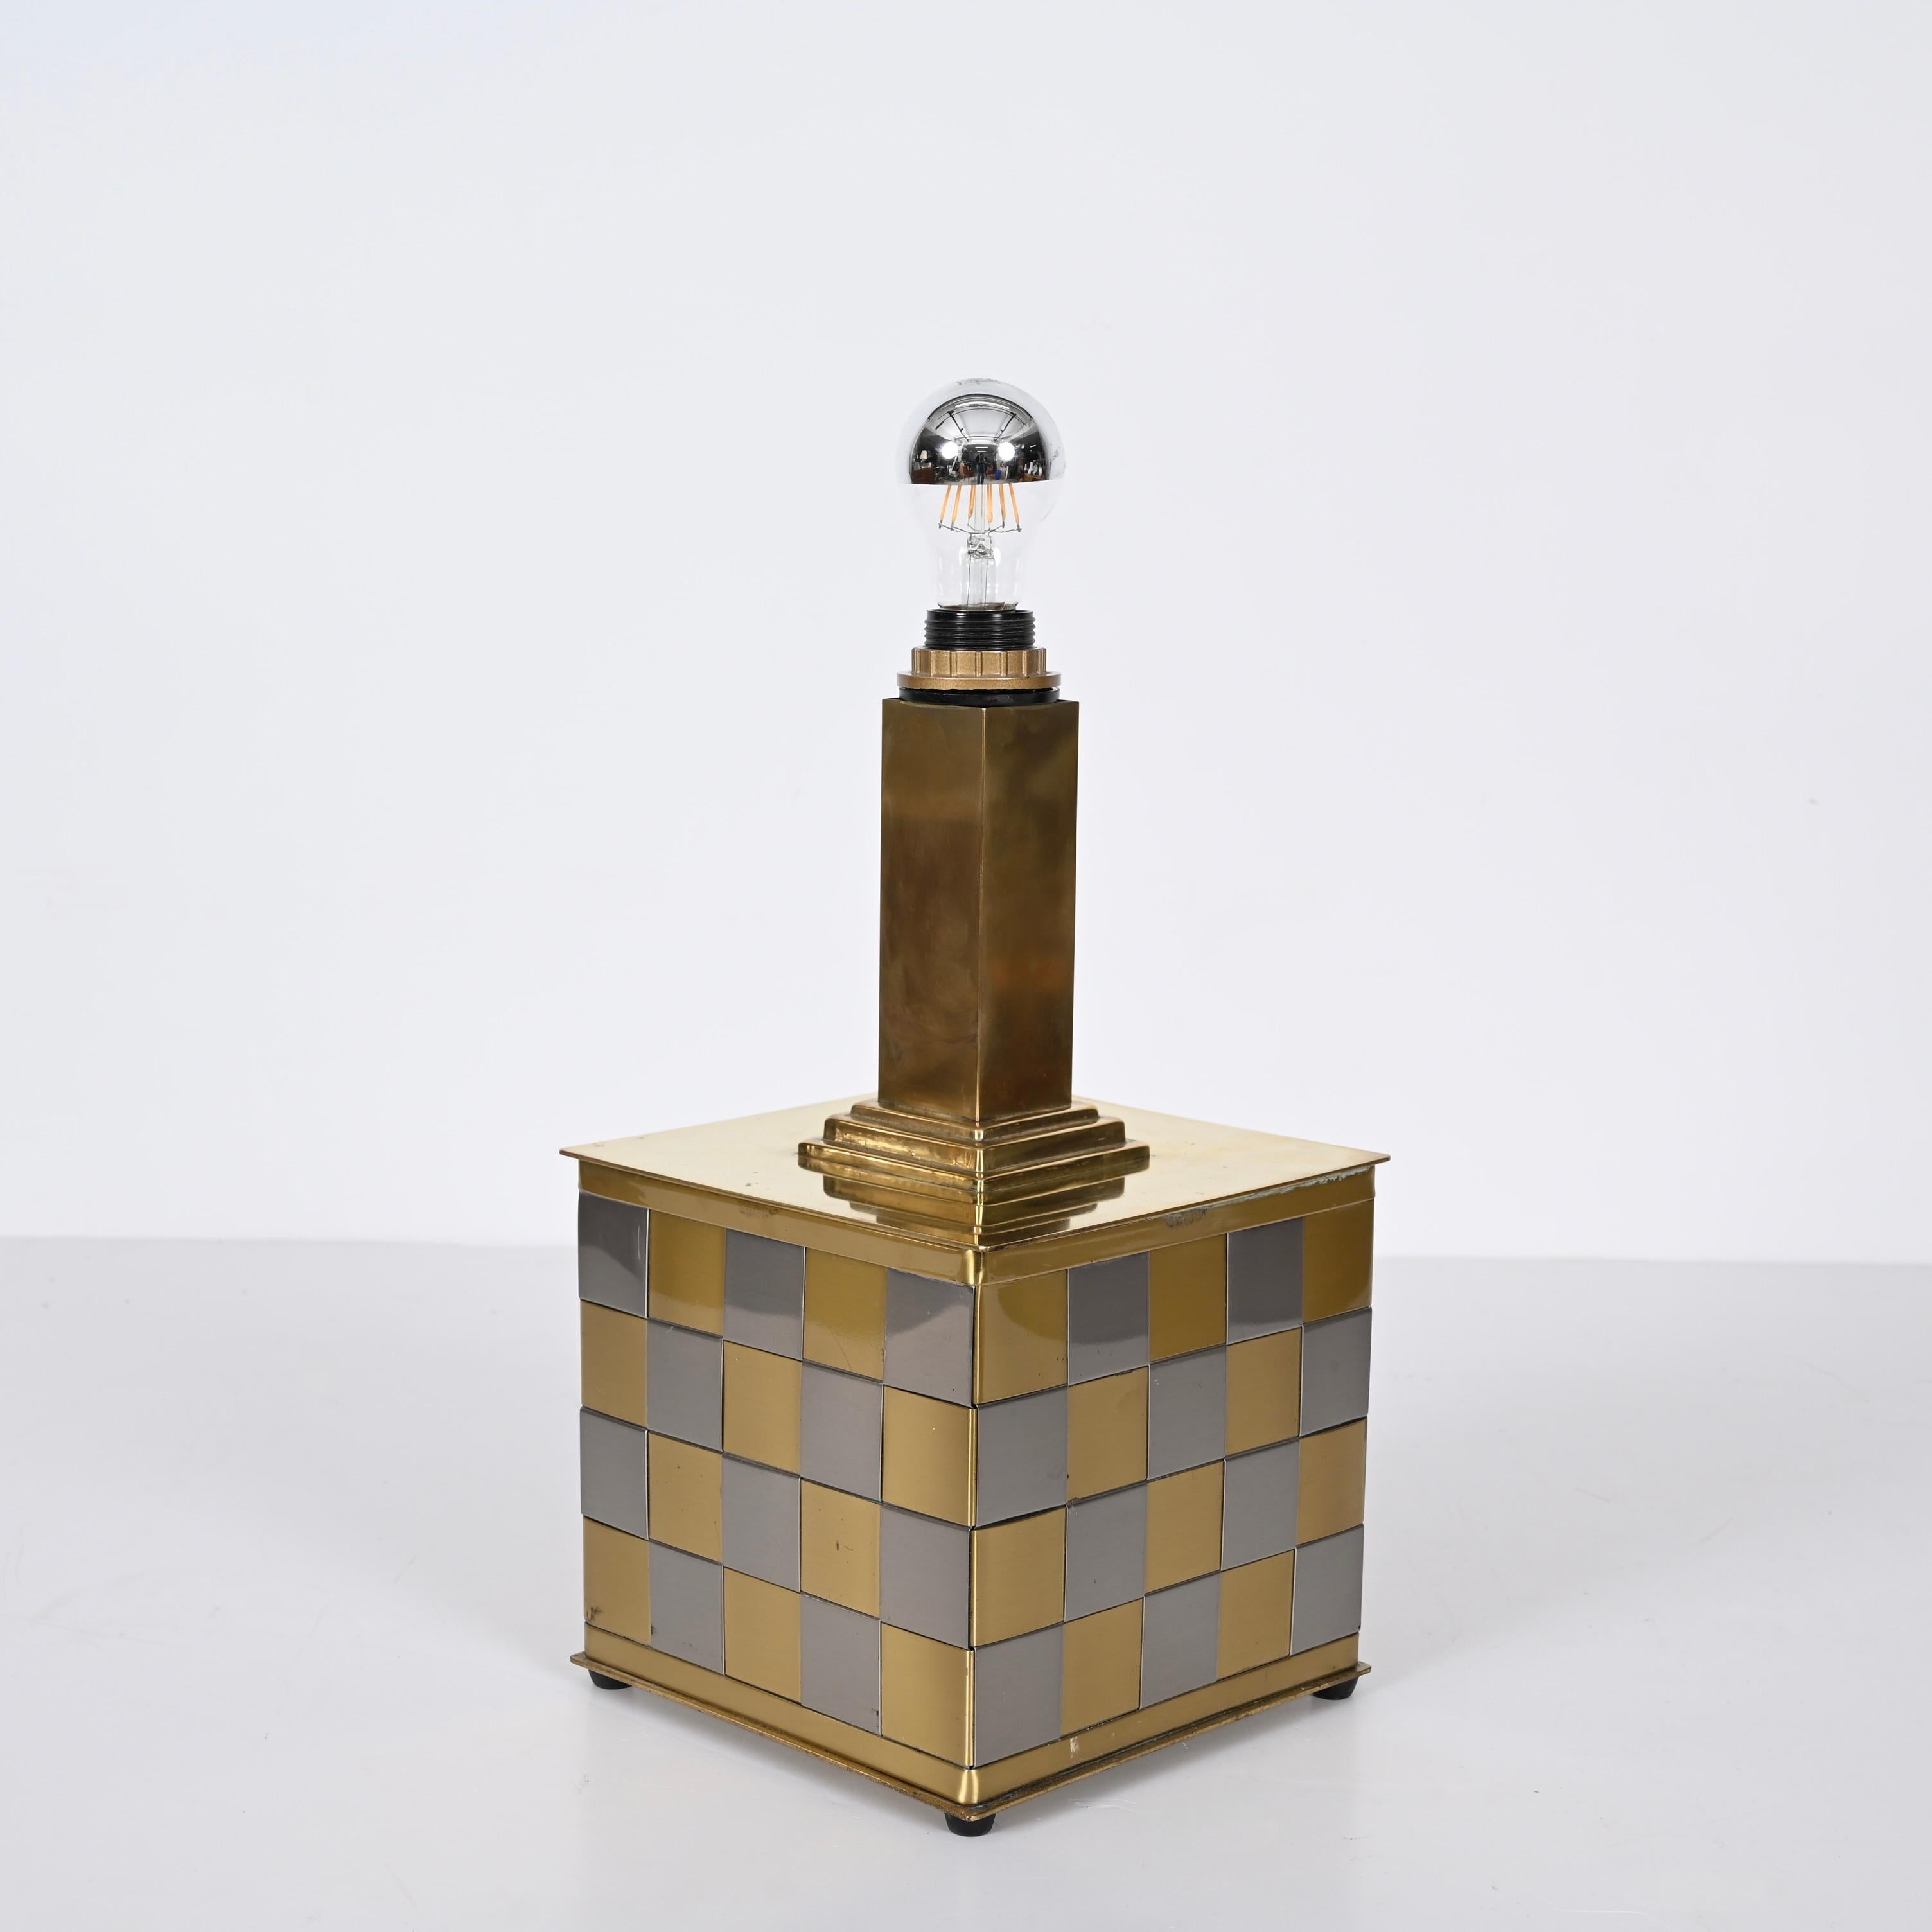 Midcentury Brass and Chrome Table Lamp, Willy Rizzo, Italy 1970s For Sale 2